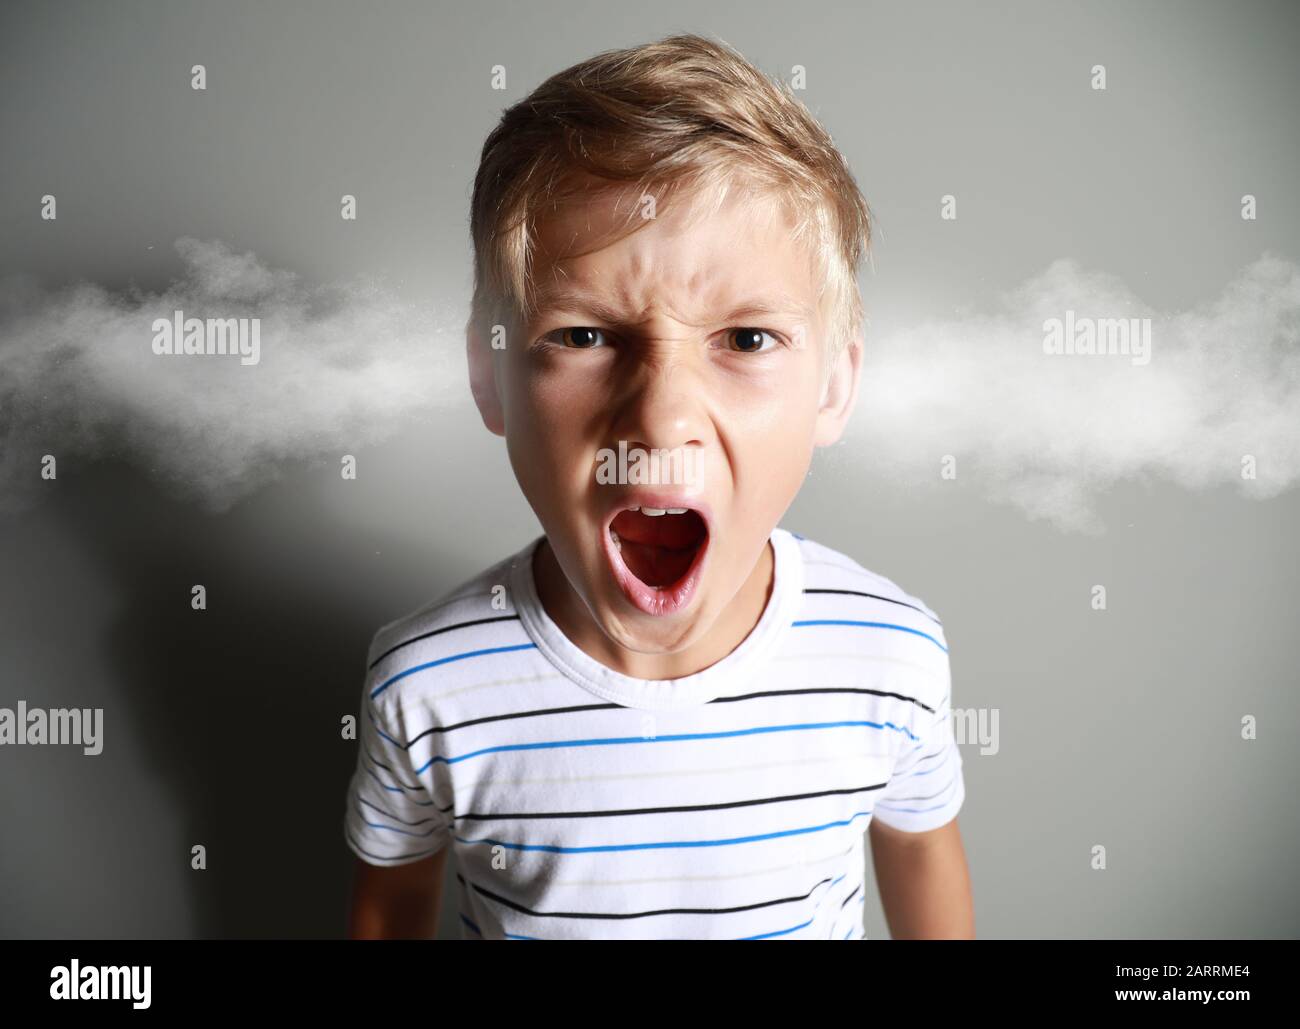 Portrait of angry little boy with steam coming out of ears on grey background Stock Photo